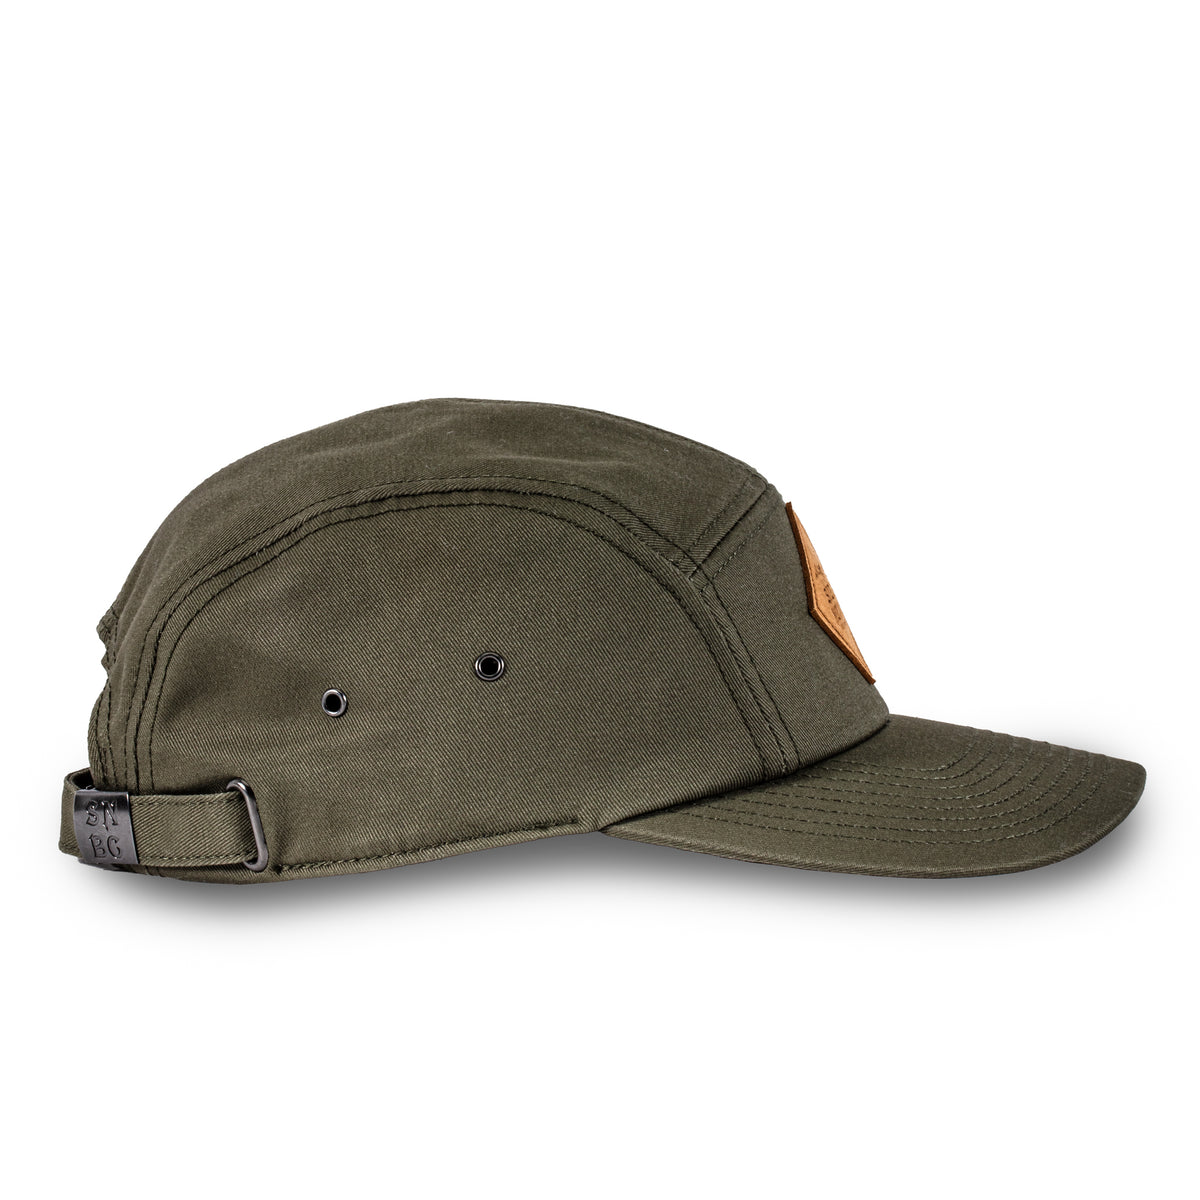 Side view of the Sierra Nevada diamond patch green camper hat